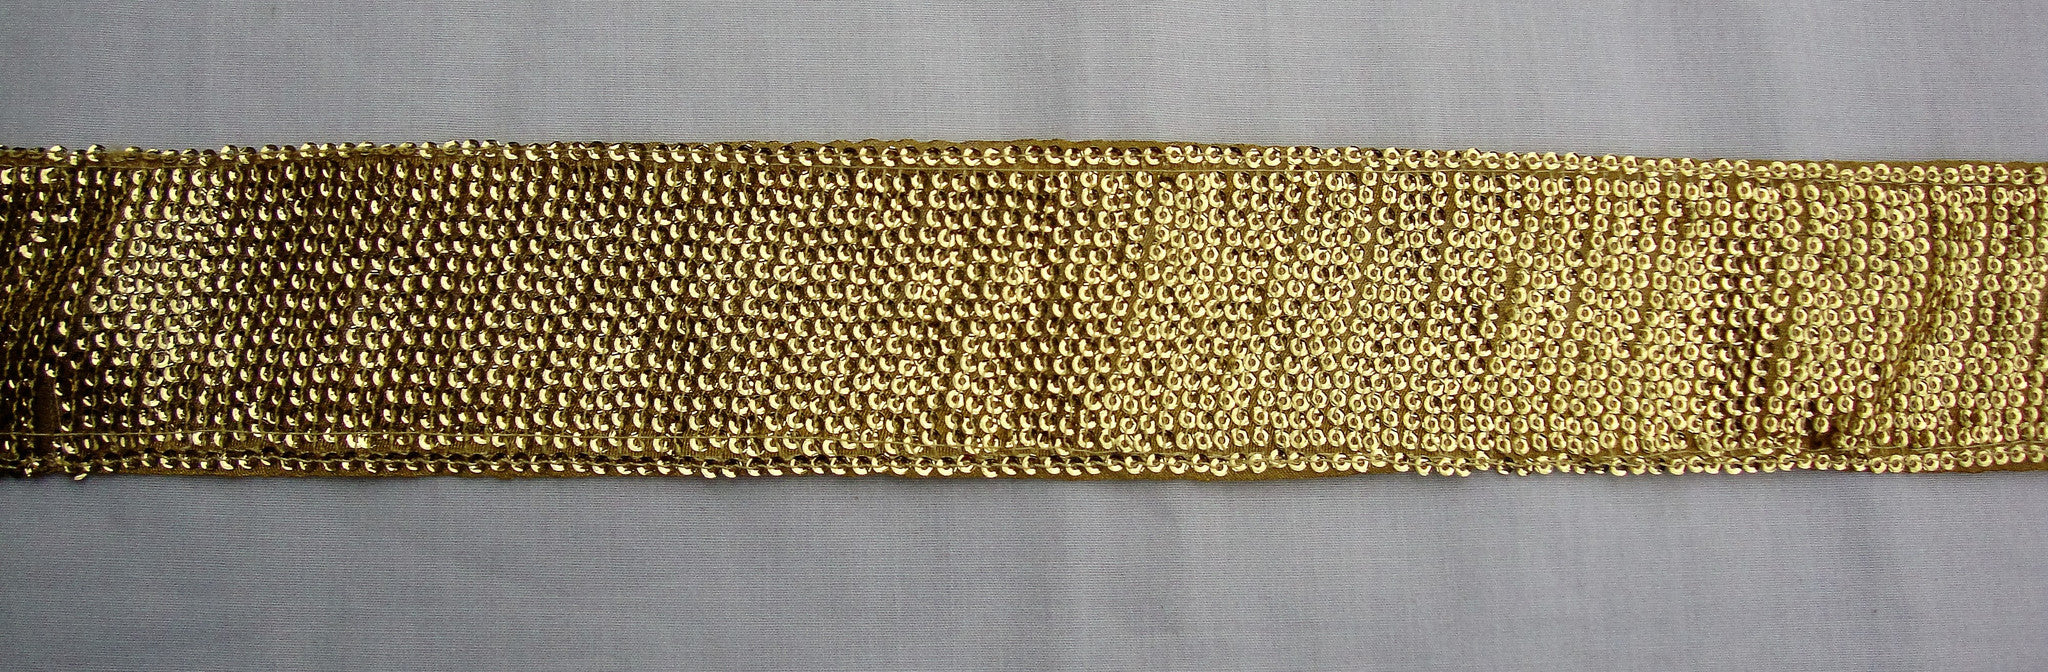 Gold Trimming with sequins (Sold as a 3 yard piece)